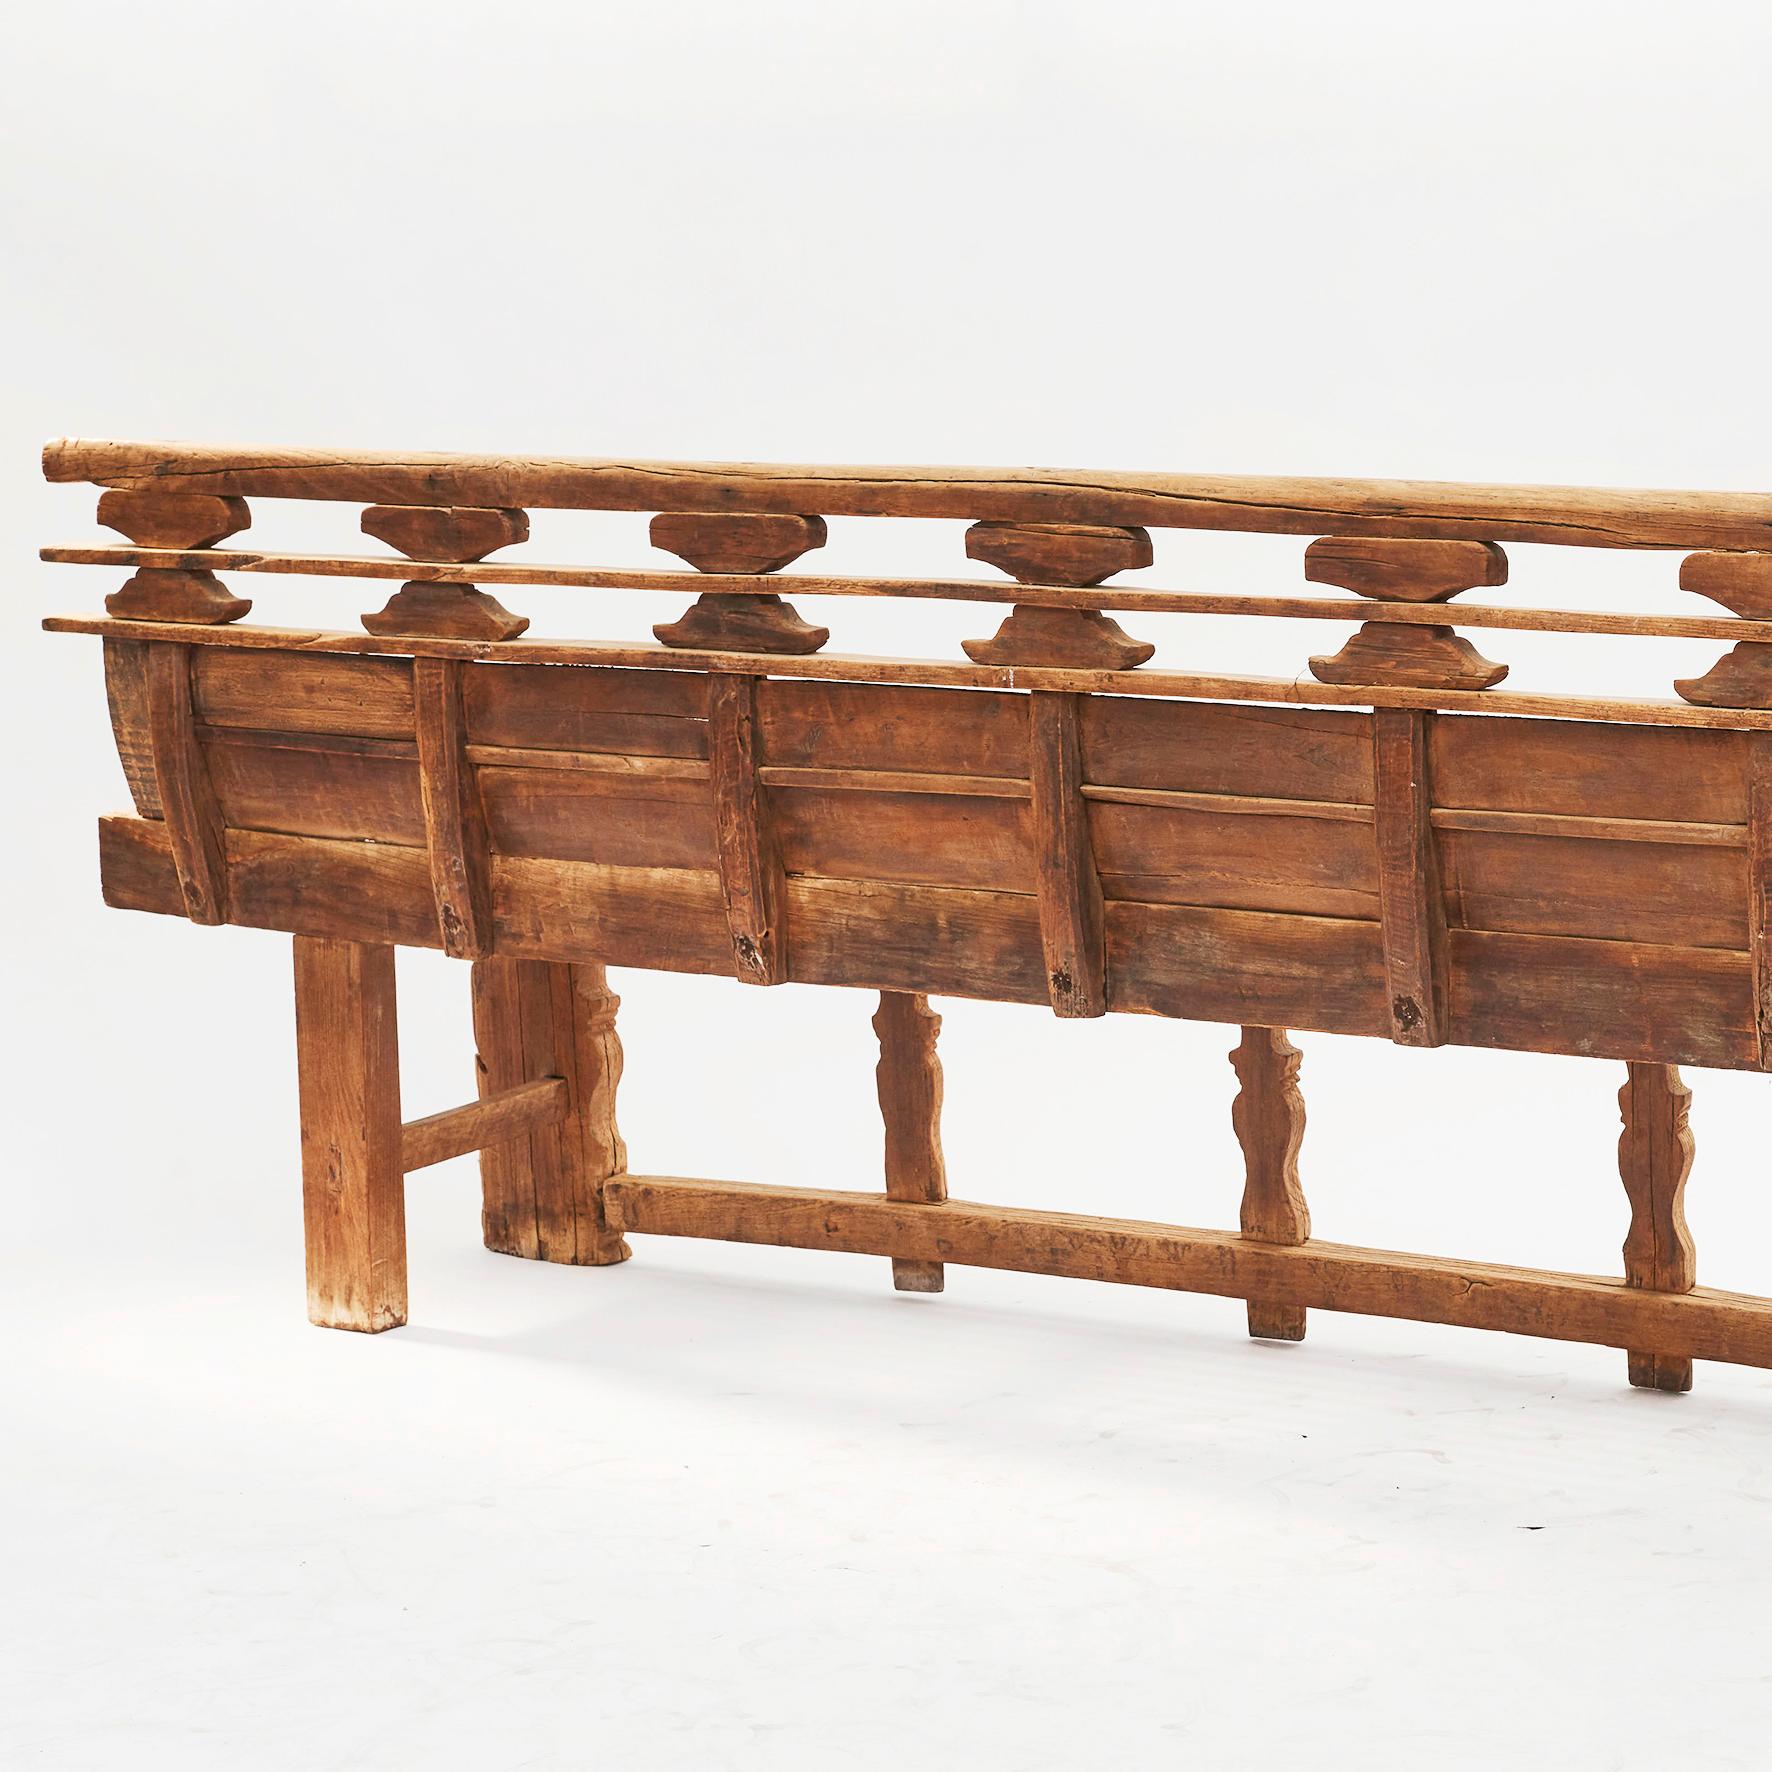 Rare 16th-17th century bench in elm with hand carved details.
Original condition with a great patina.
Shanxi Province, China, 1500-1600.
Ming Dynasty.

Benches like this were seen in front of Chinese temples for people to sit and rest or used to